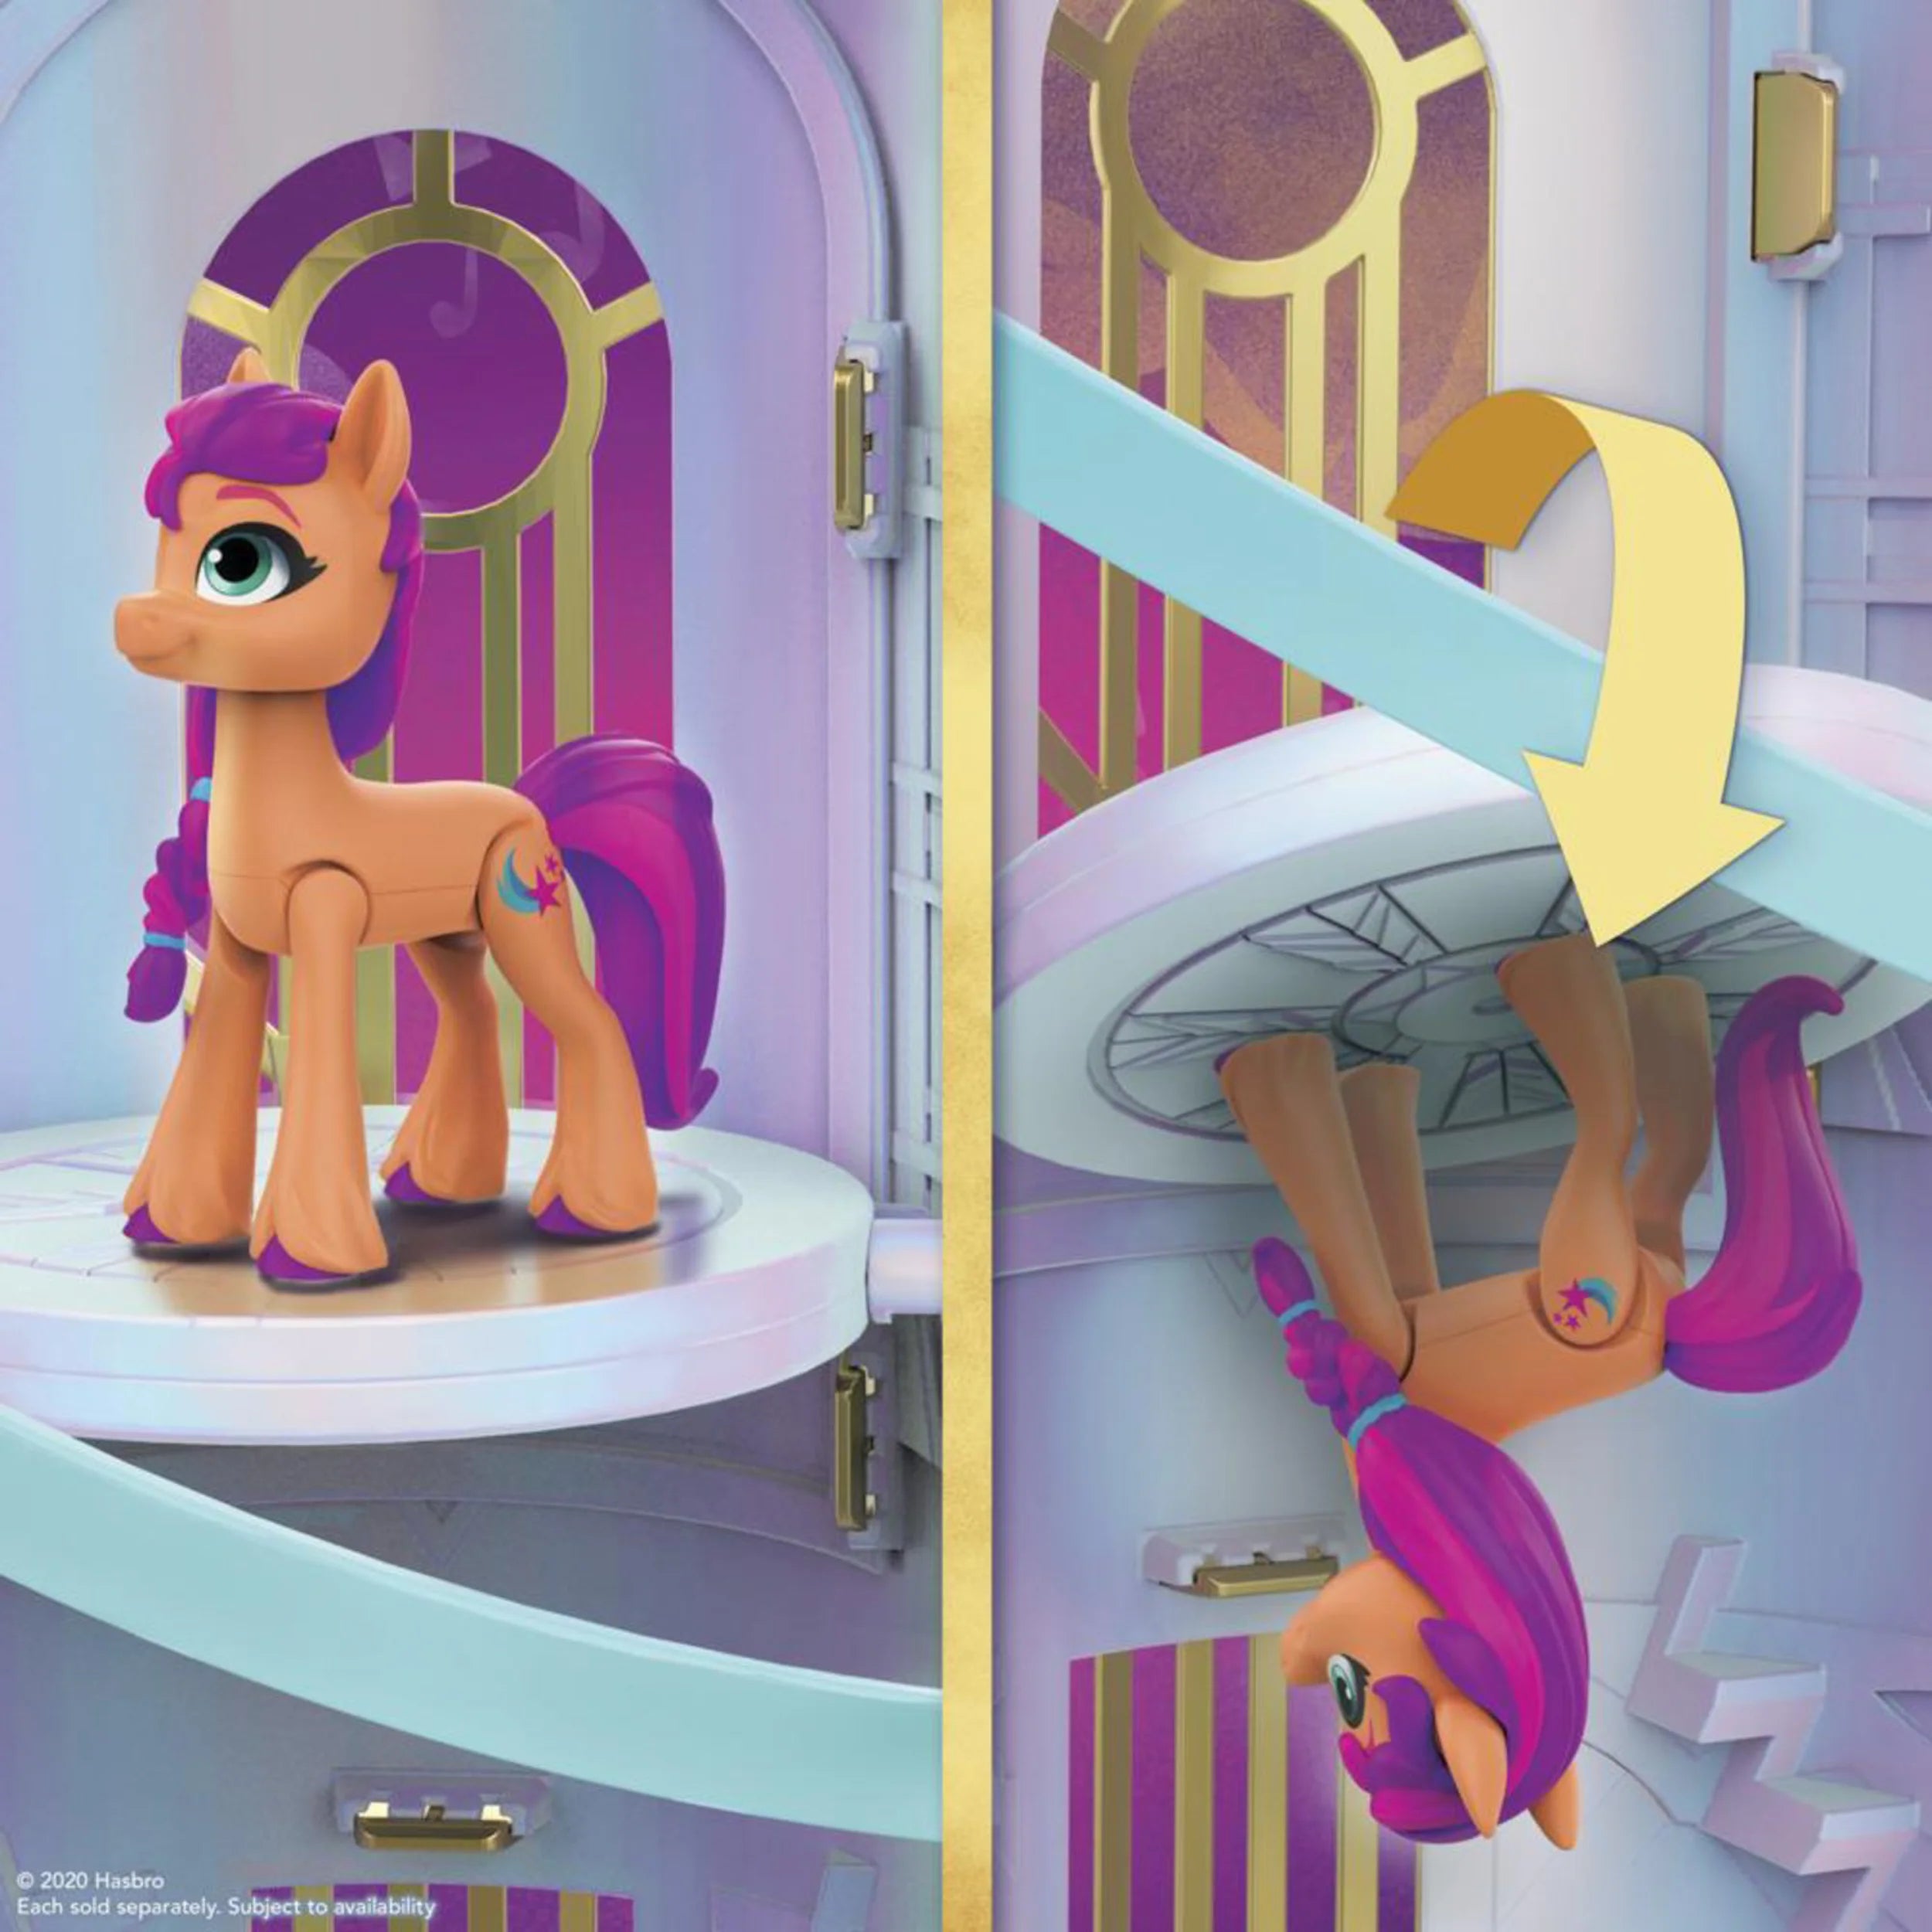 HASBRO - My Little Pony: A New Generation Movie Royal Racing Ziplines - 22-Inch Castle Playset with Ziplines, Princess Petals Toy - Mod: HSBF21565L0